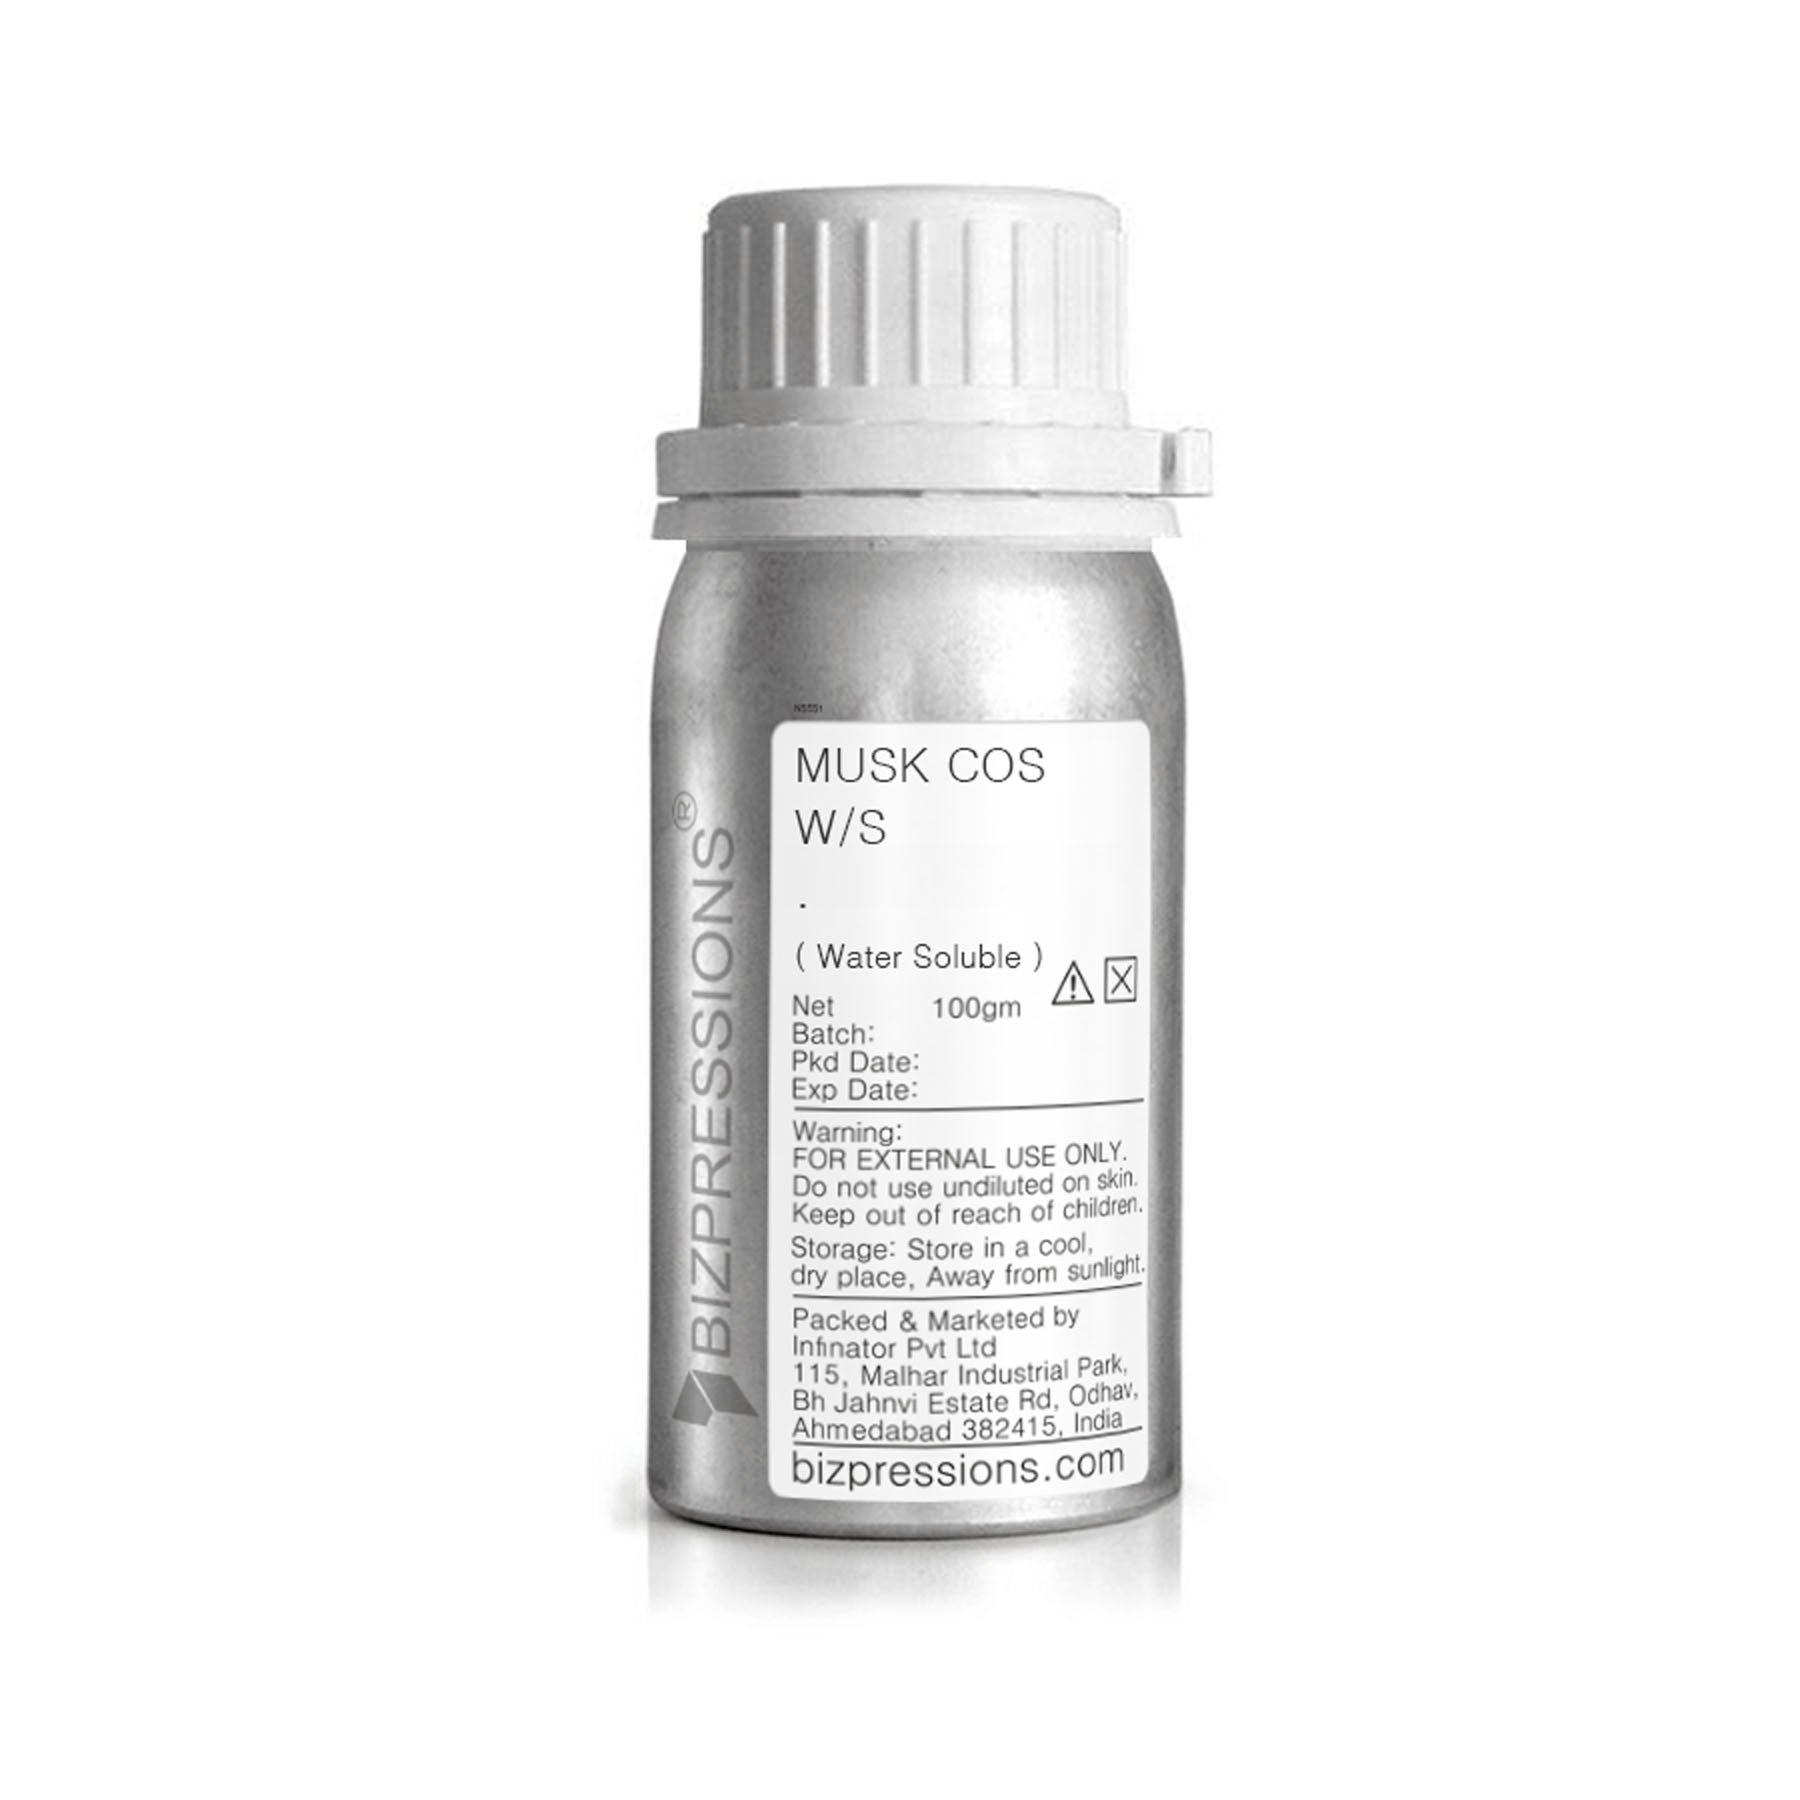 MUSK COS W/S - Fragrance ( Water Soluble ) - 100 gm